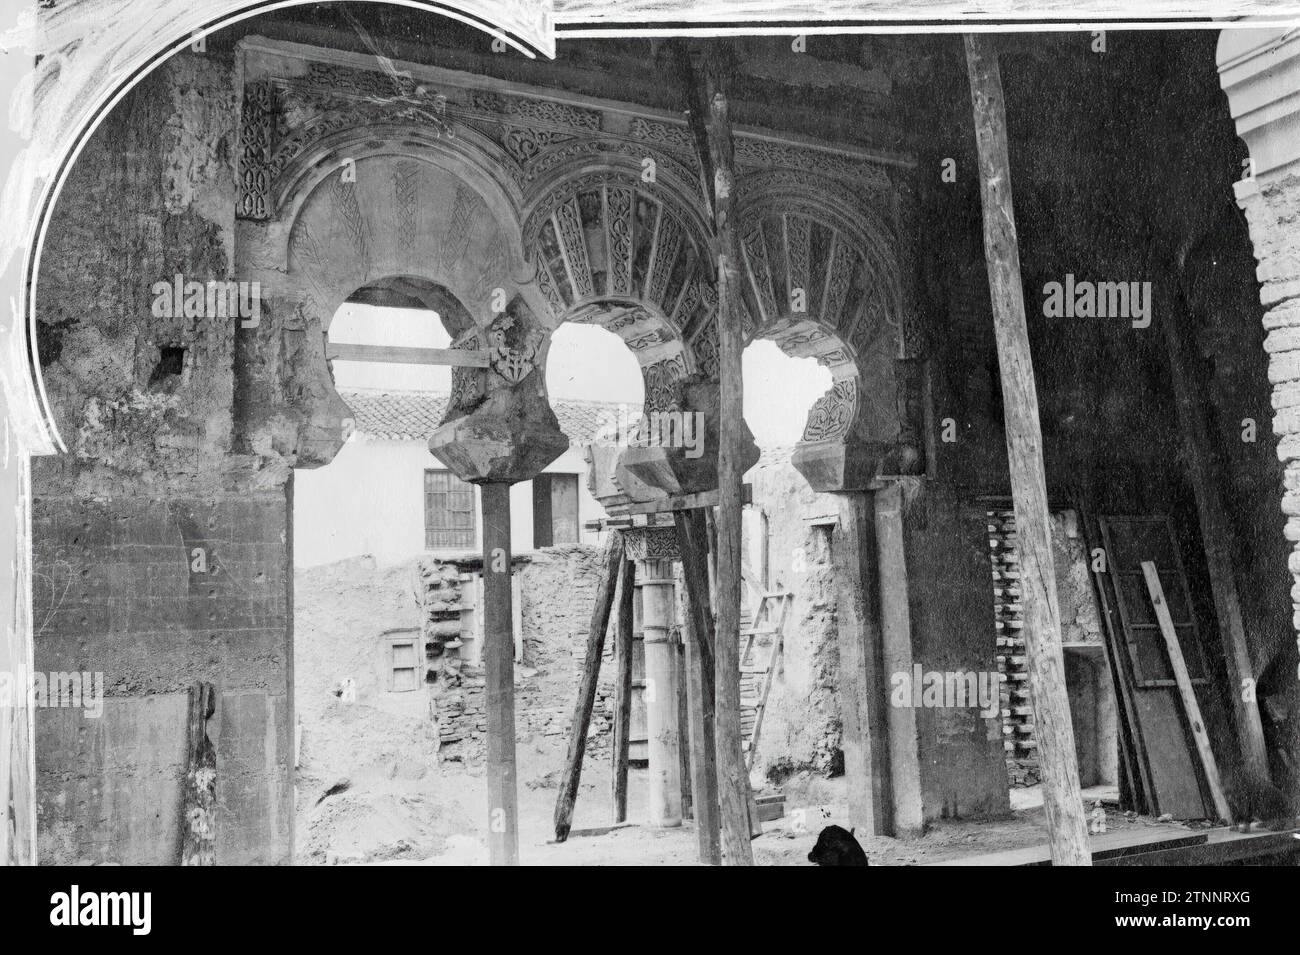 04/30/1935. Alcazaba of Malaga. Trace of the Arches. Photo: Aguilera.-Arches Discovered in the Malagueña citadel, whose works the Khalifa will visit during his stay in the City, on the occasion of the Celebrations. Photo: Aguilera.-la alcazaba It is one of the most significant buildings in Malaga. It is a building from the Islamic period built on a small hill at the eastern end of the city. According to Arab Sources, it was built by Badis, King Ziri of Granada, between 1057 and 1063, although it is possible that an earlier building was erected in that same place. The work was carried out with Stock Photo